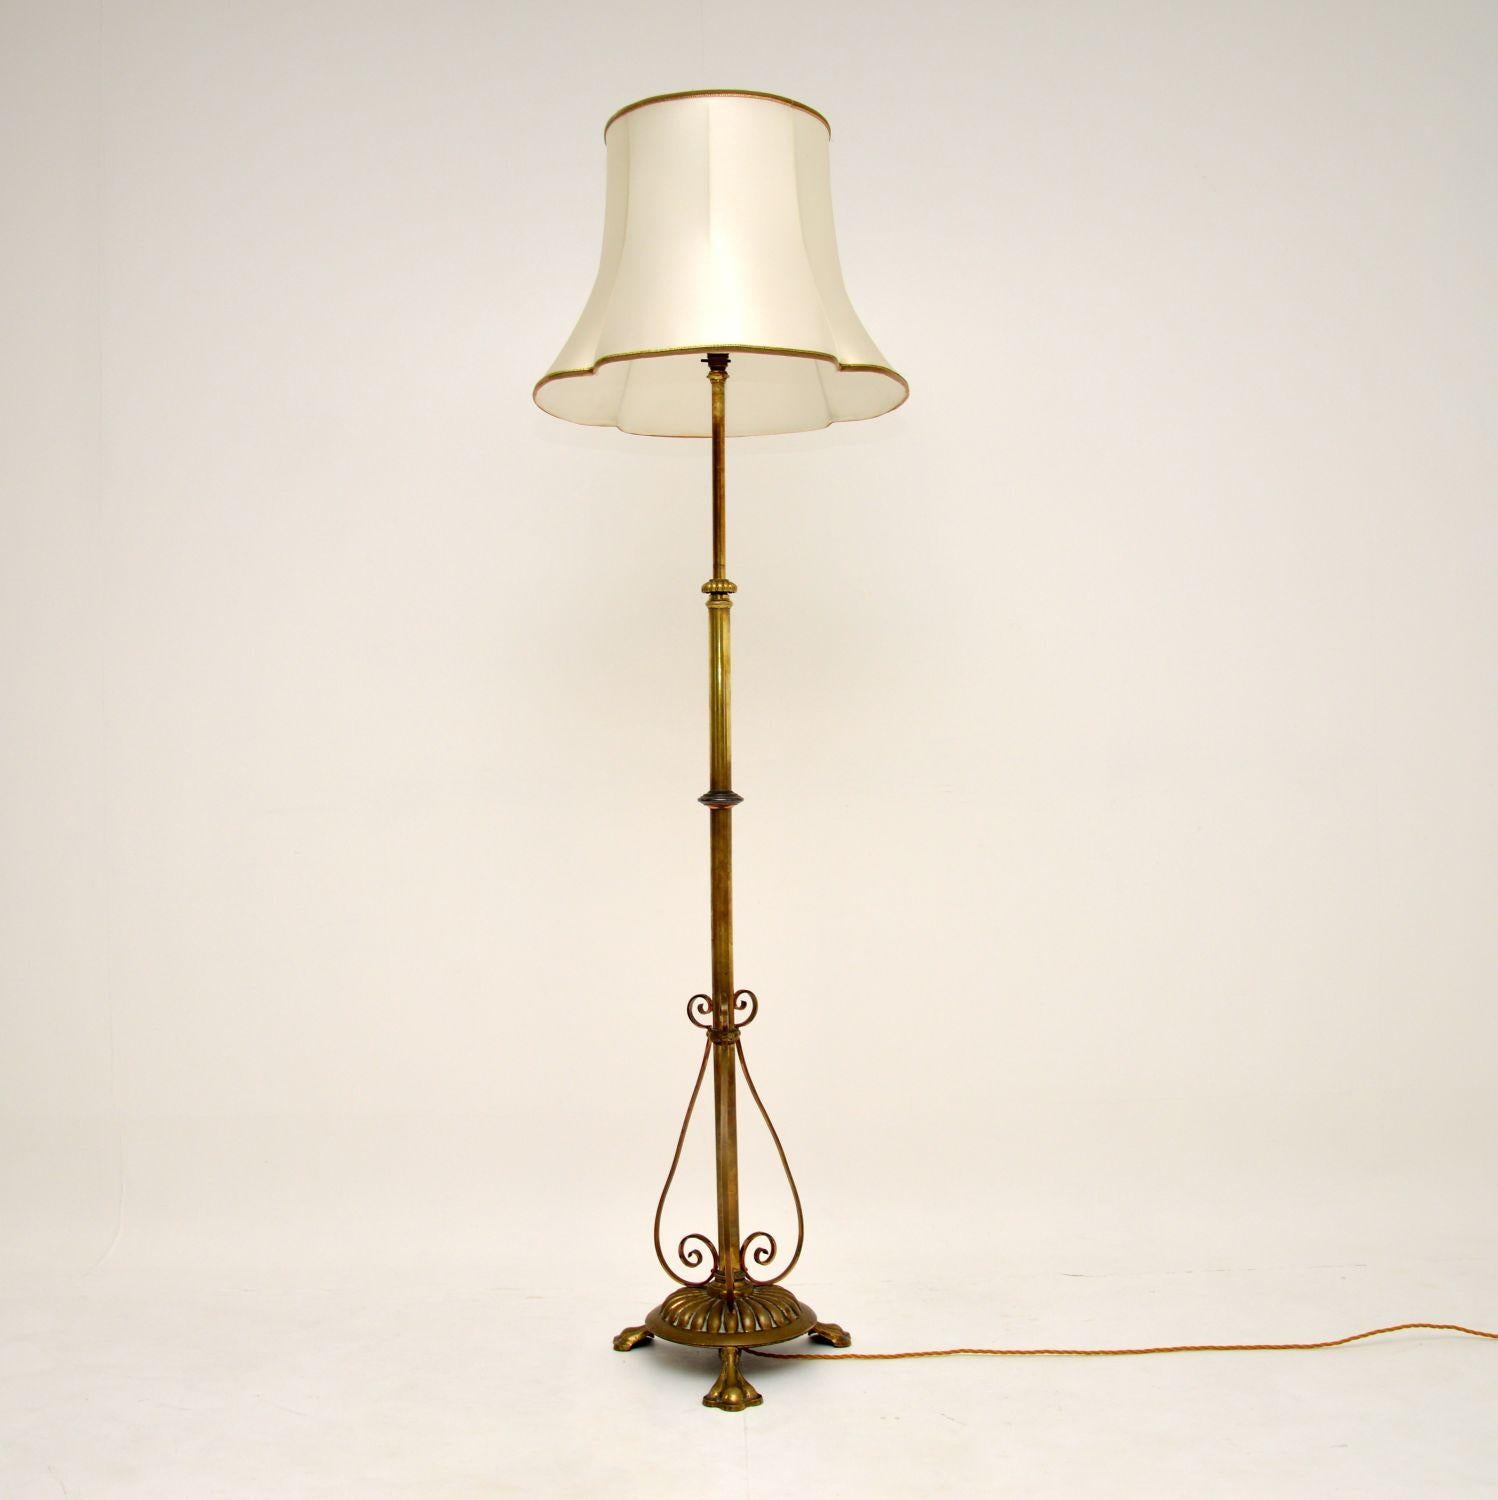 A wonderful original antique rise and fall lamp in solid brass. This was made in France, it dates from the 1910-1920’s period.

This is of absolutely amazing quality, the brass frame is beautifully sculpted and is very heavy. The rise and fall